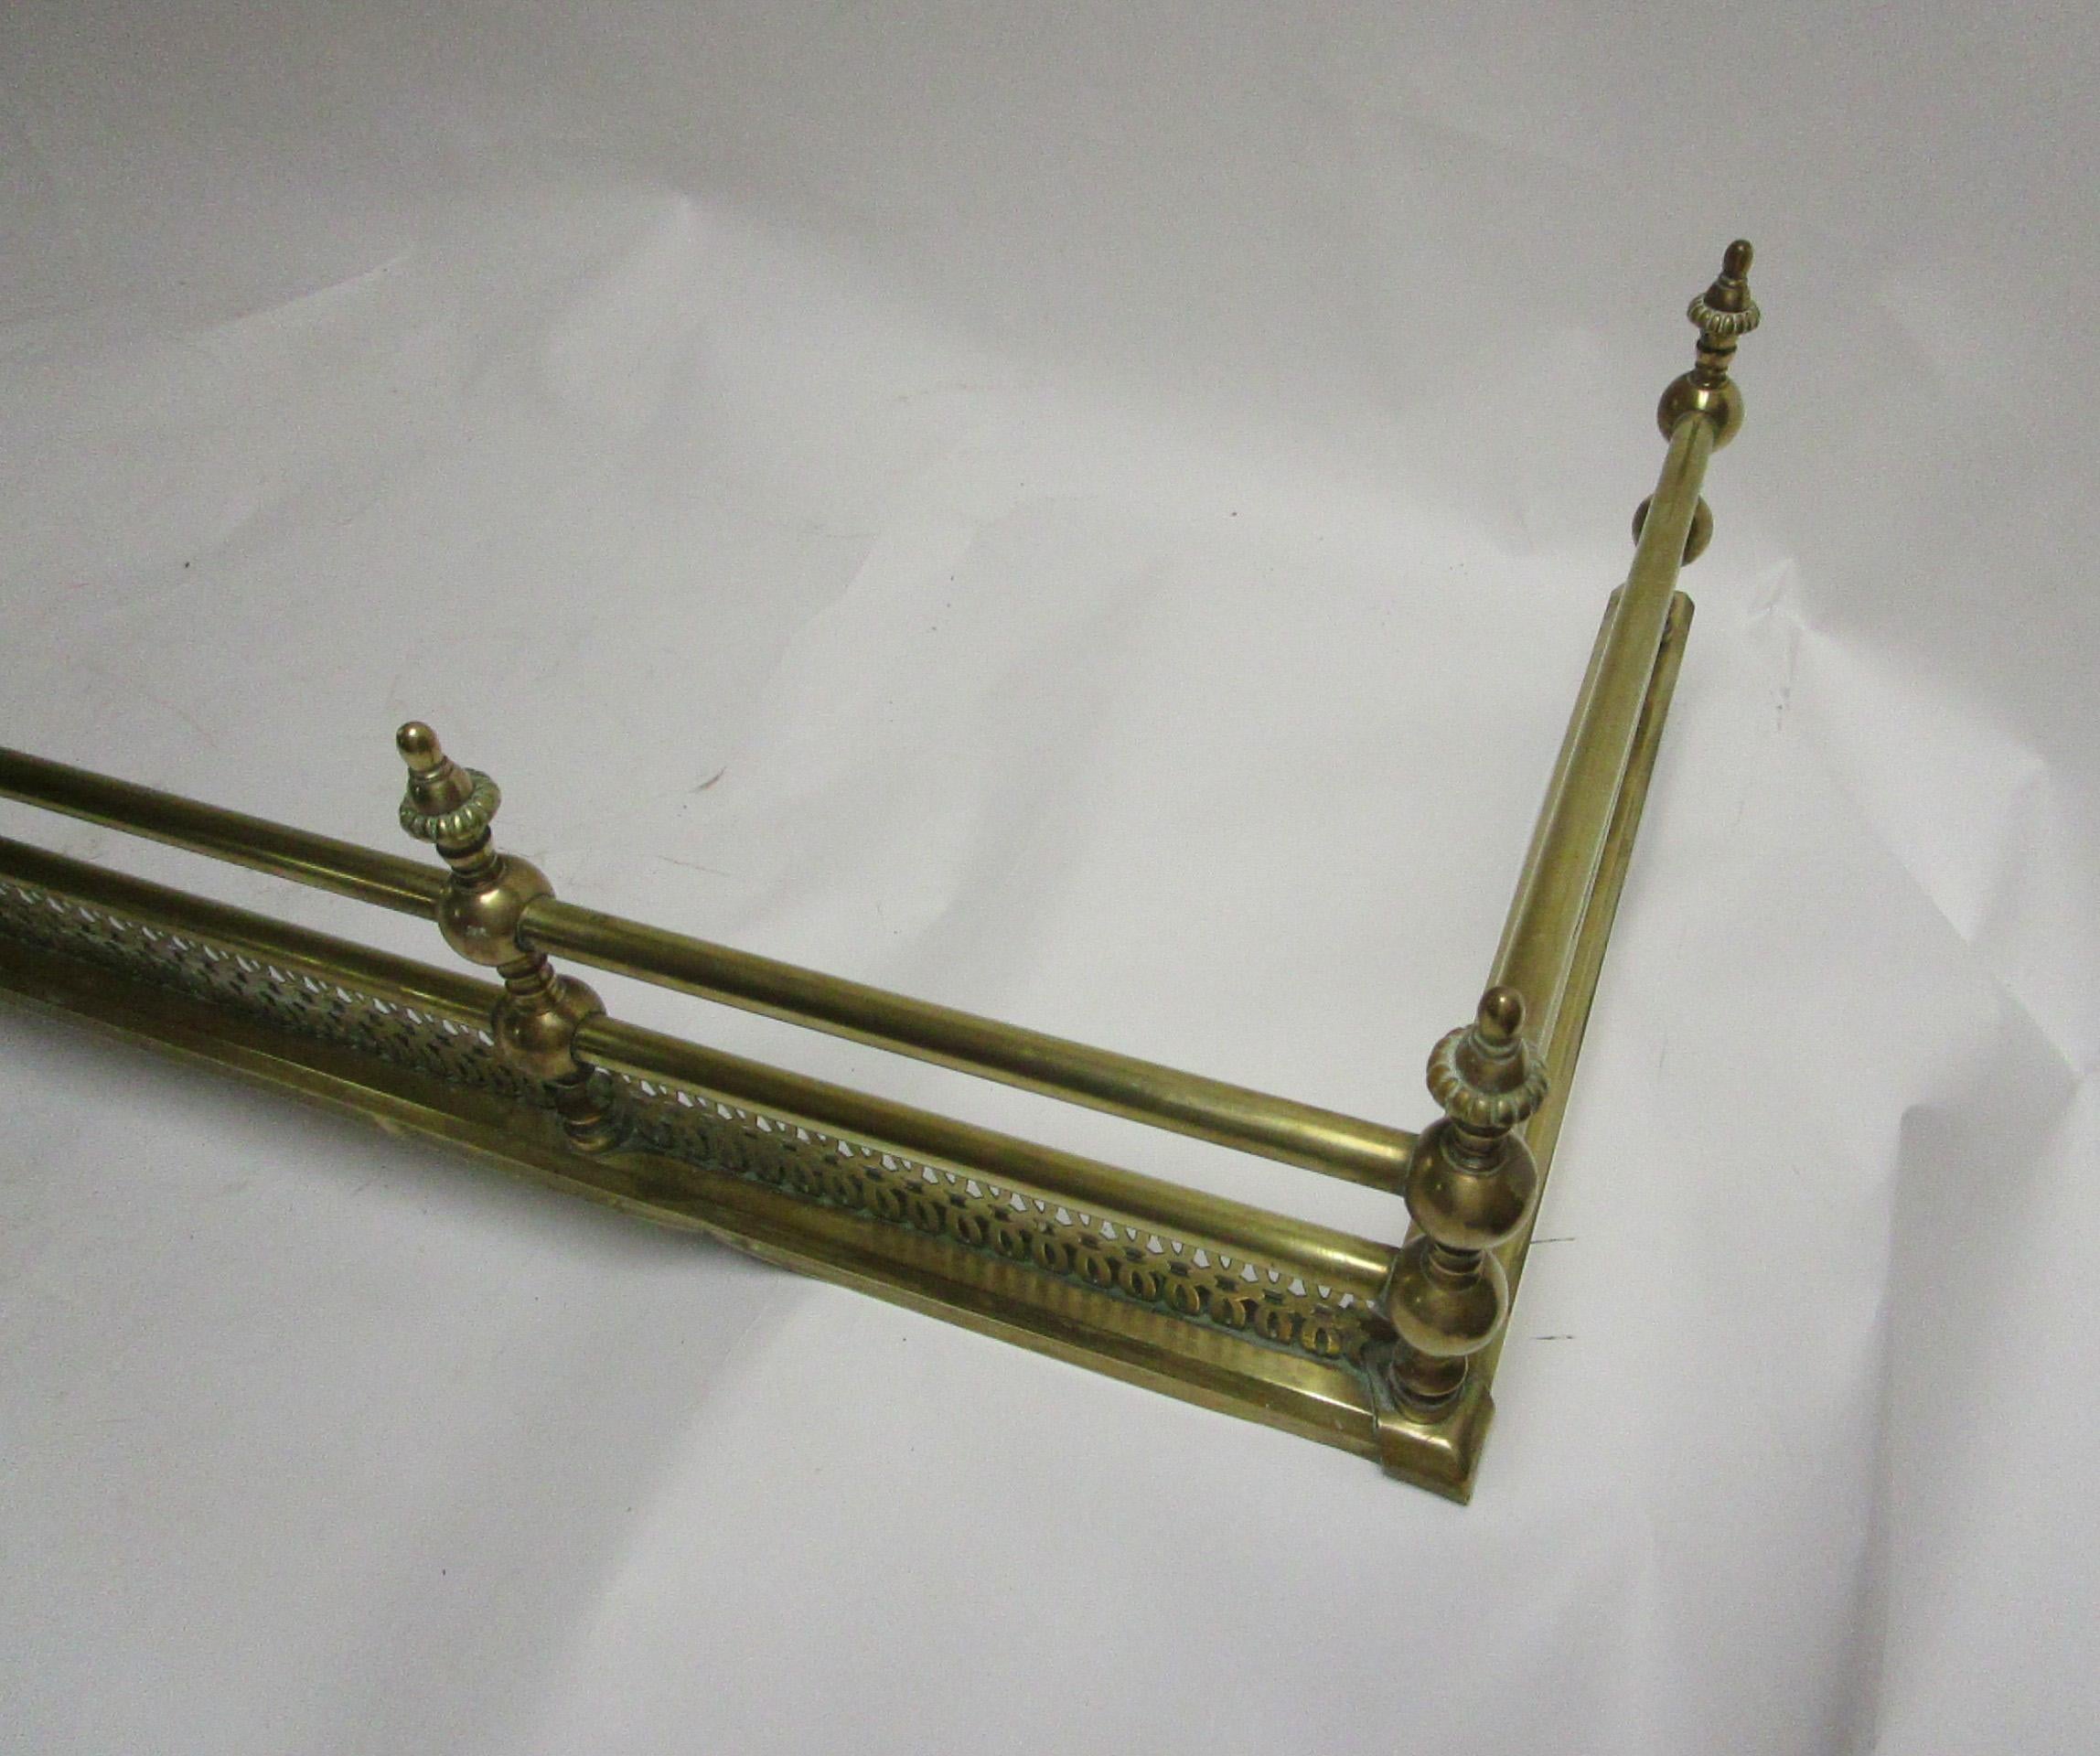 Classic Regency period brass fender having a reticulated frame work. A handsome solid piece in a large size. Inside measurements 59 inches wide x 15.75 deep. Over-all measurements below.